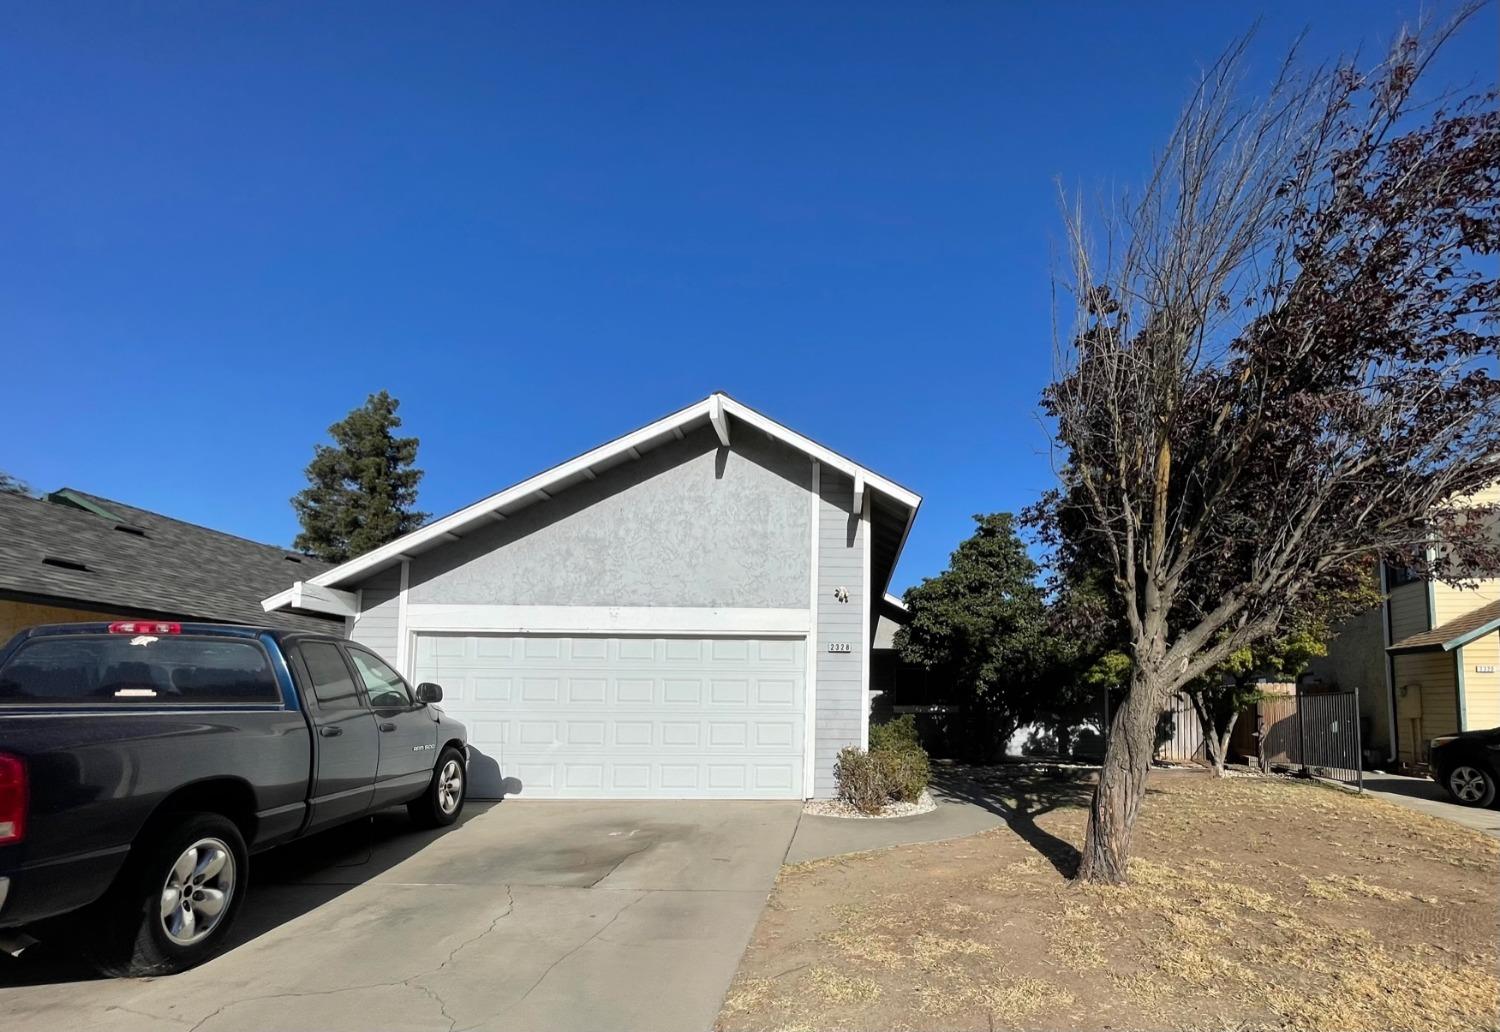 This home is great for a first time buyers or a investor looking to add to his portfolio. Located a short distance from Mid-State Plaza and other shopping.